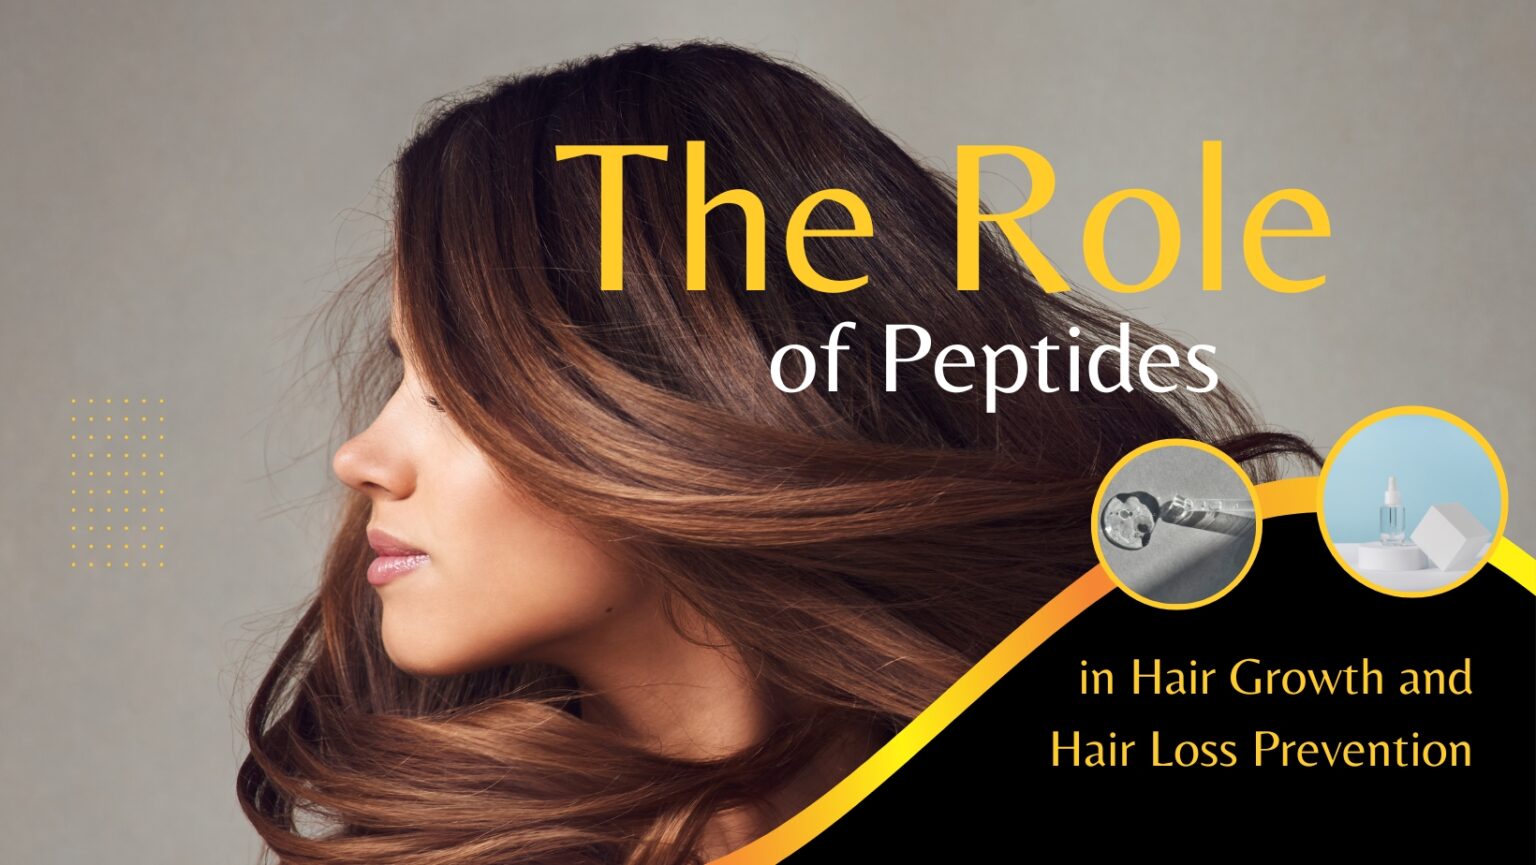 The Role of Peptides in Hair Growth and Hair Loss Prevention